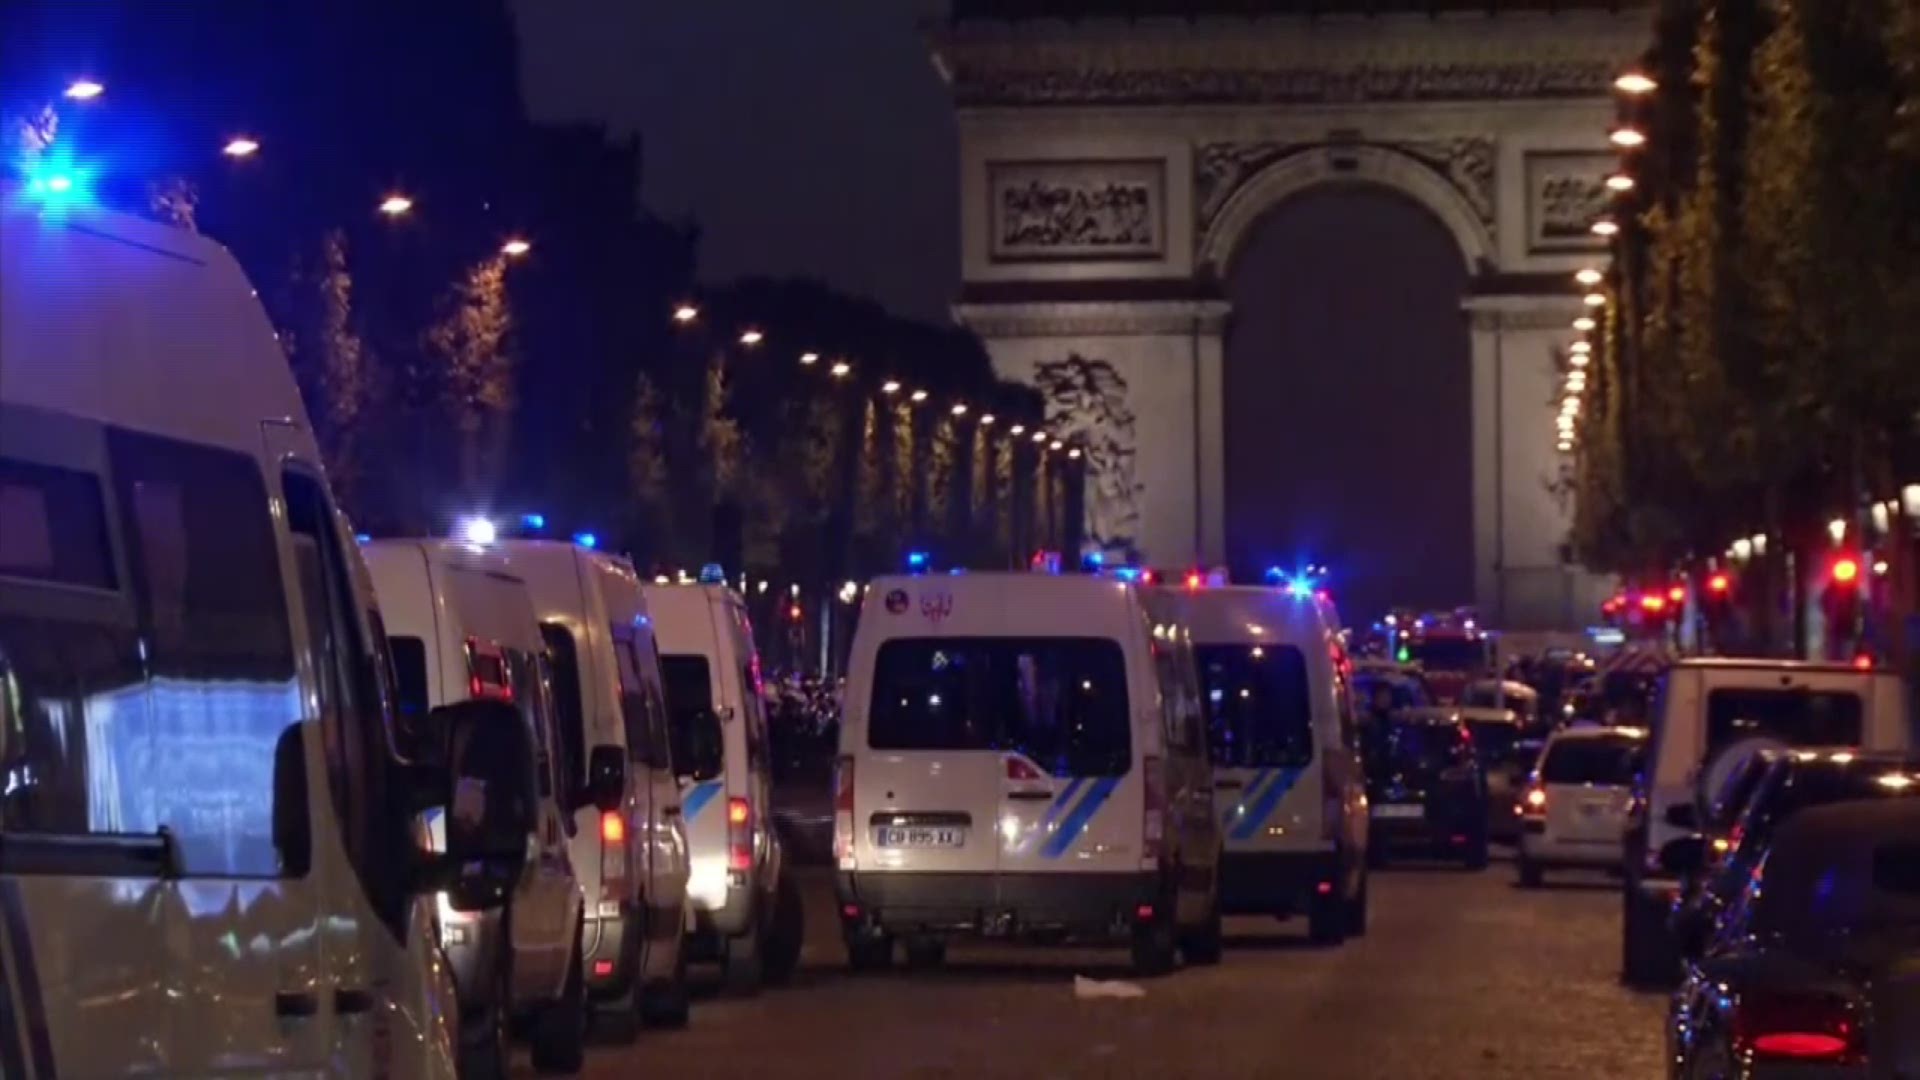 RAW: Video from the shooting scene in Paris